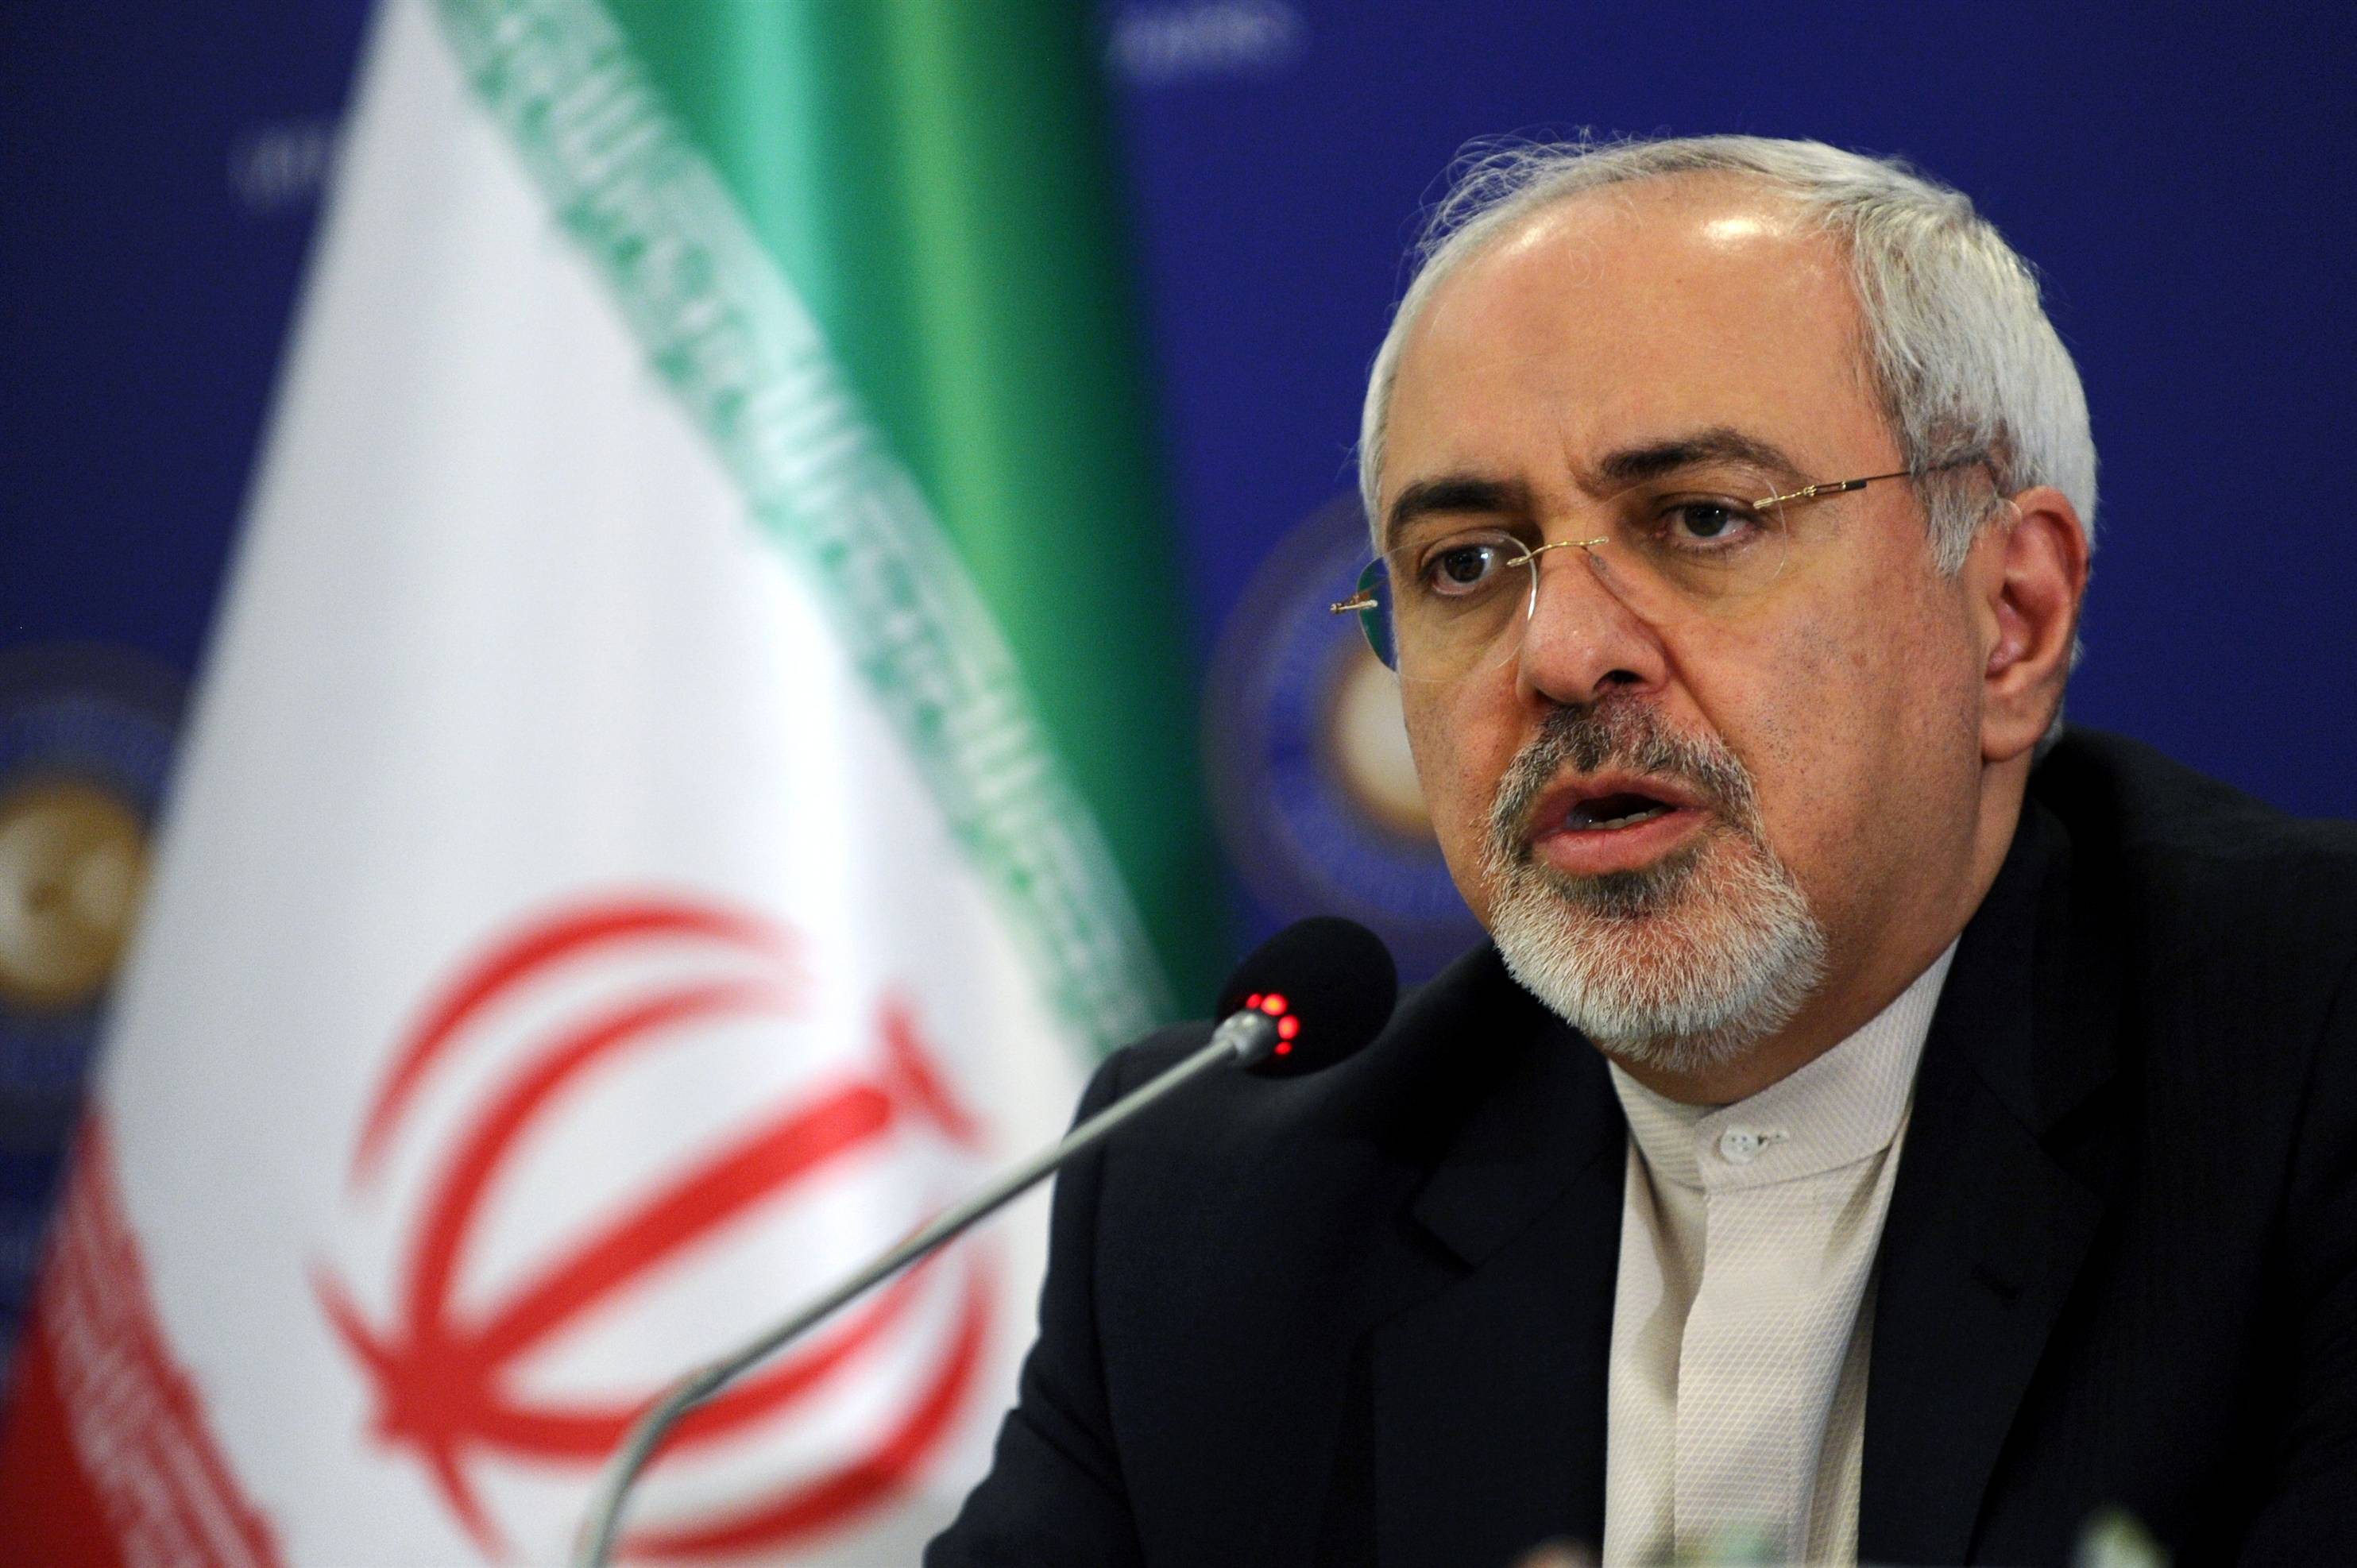 We have options in response to U.S. violation of JCPOA: Zarif